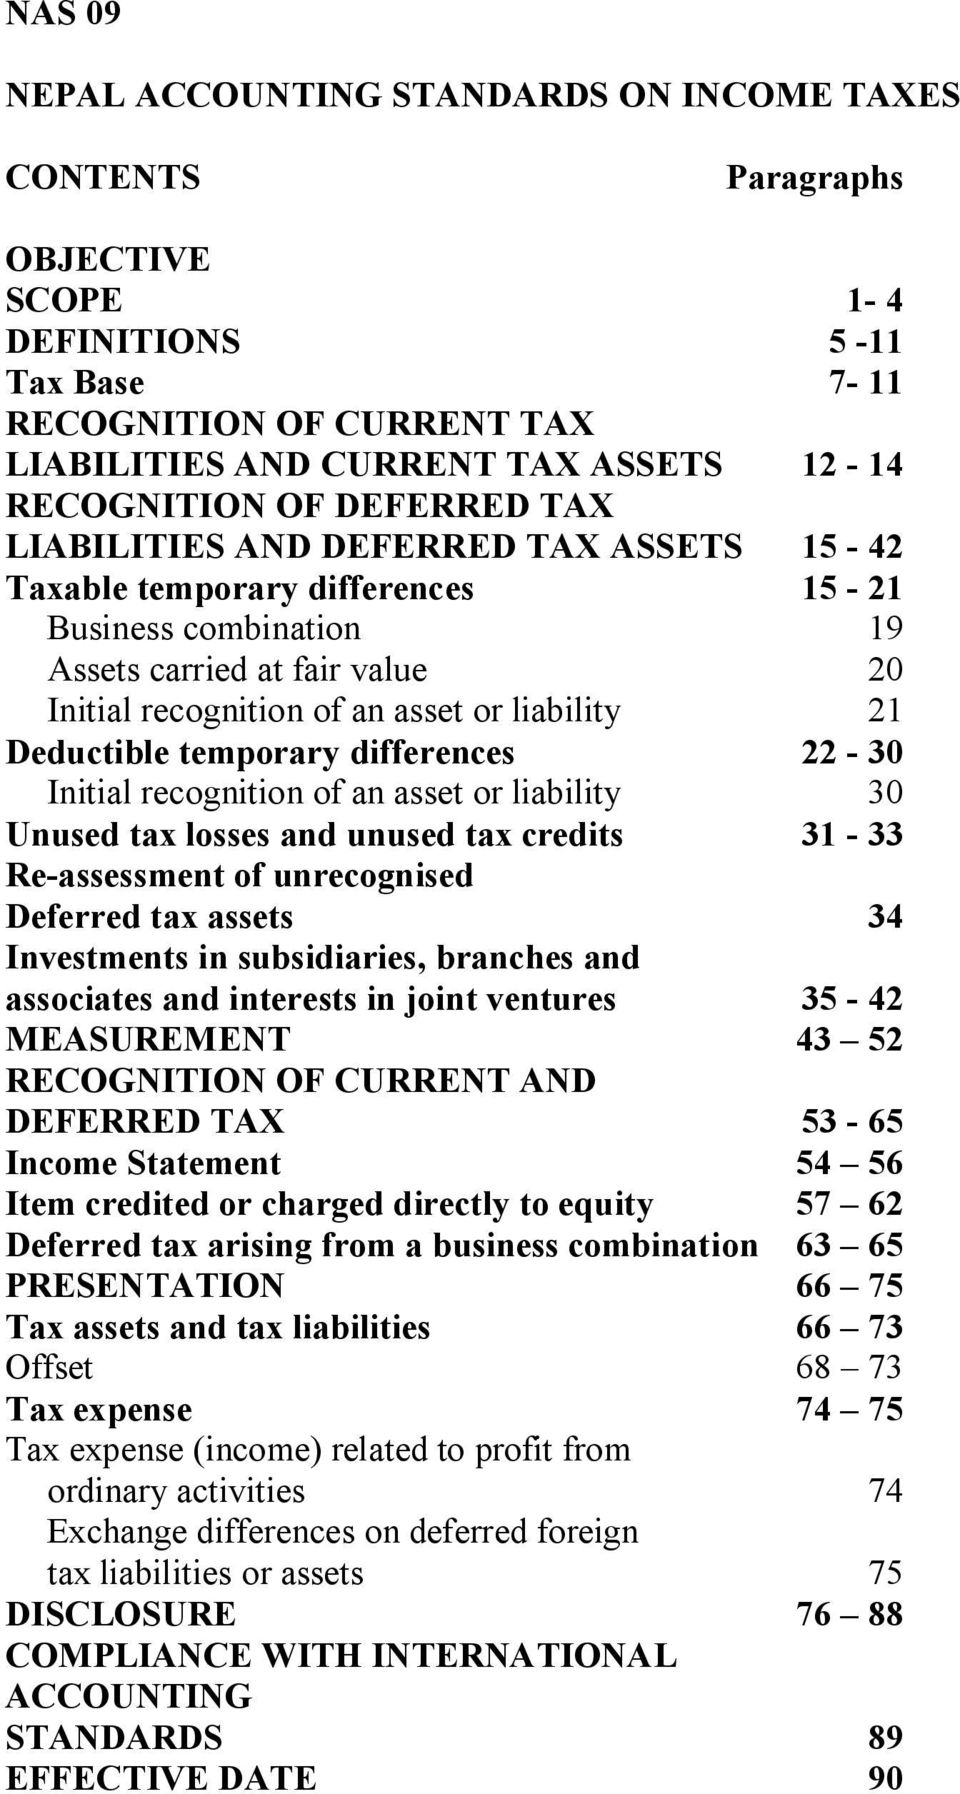 liability 21 Deductible temporary differences 22-30 Initial recognition of an asset or liability 30 Unused tax losses and unused tax credits 31-33 Re-assessment of unrecognised Deferred tax assets 34